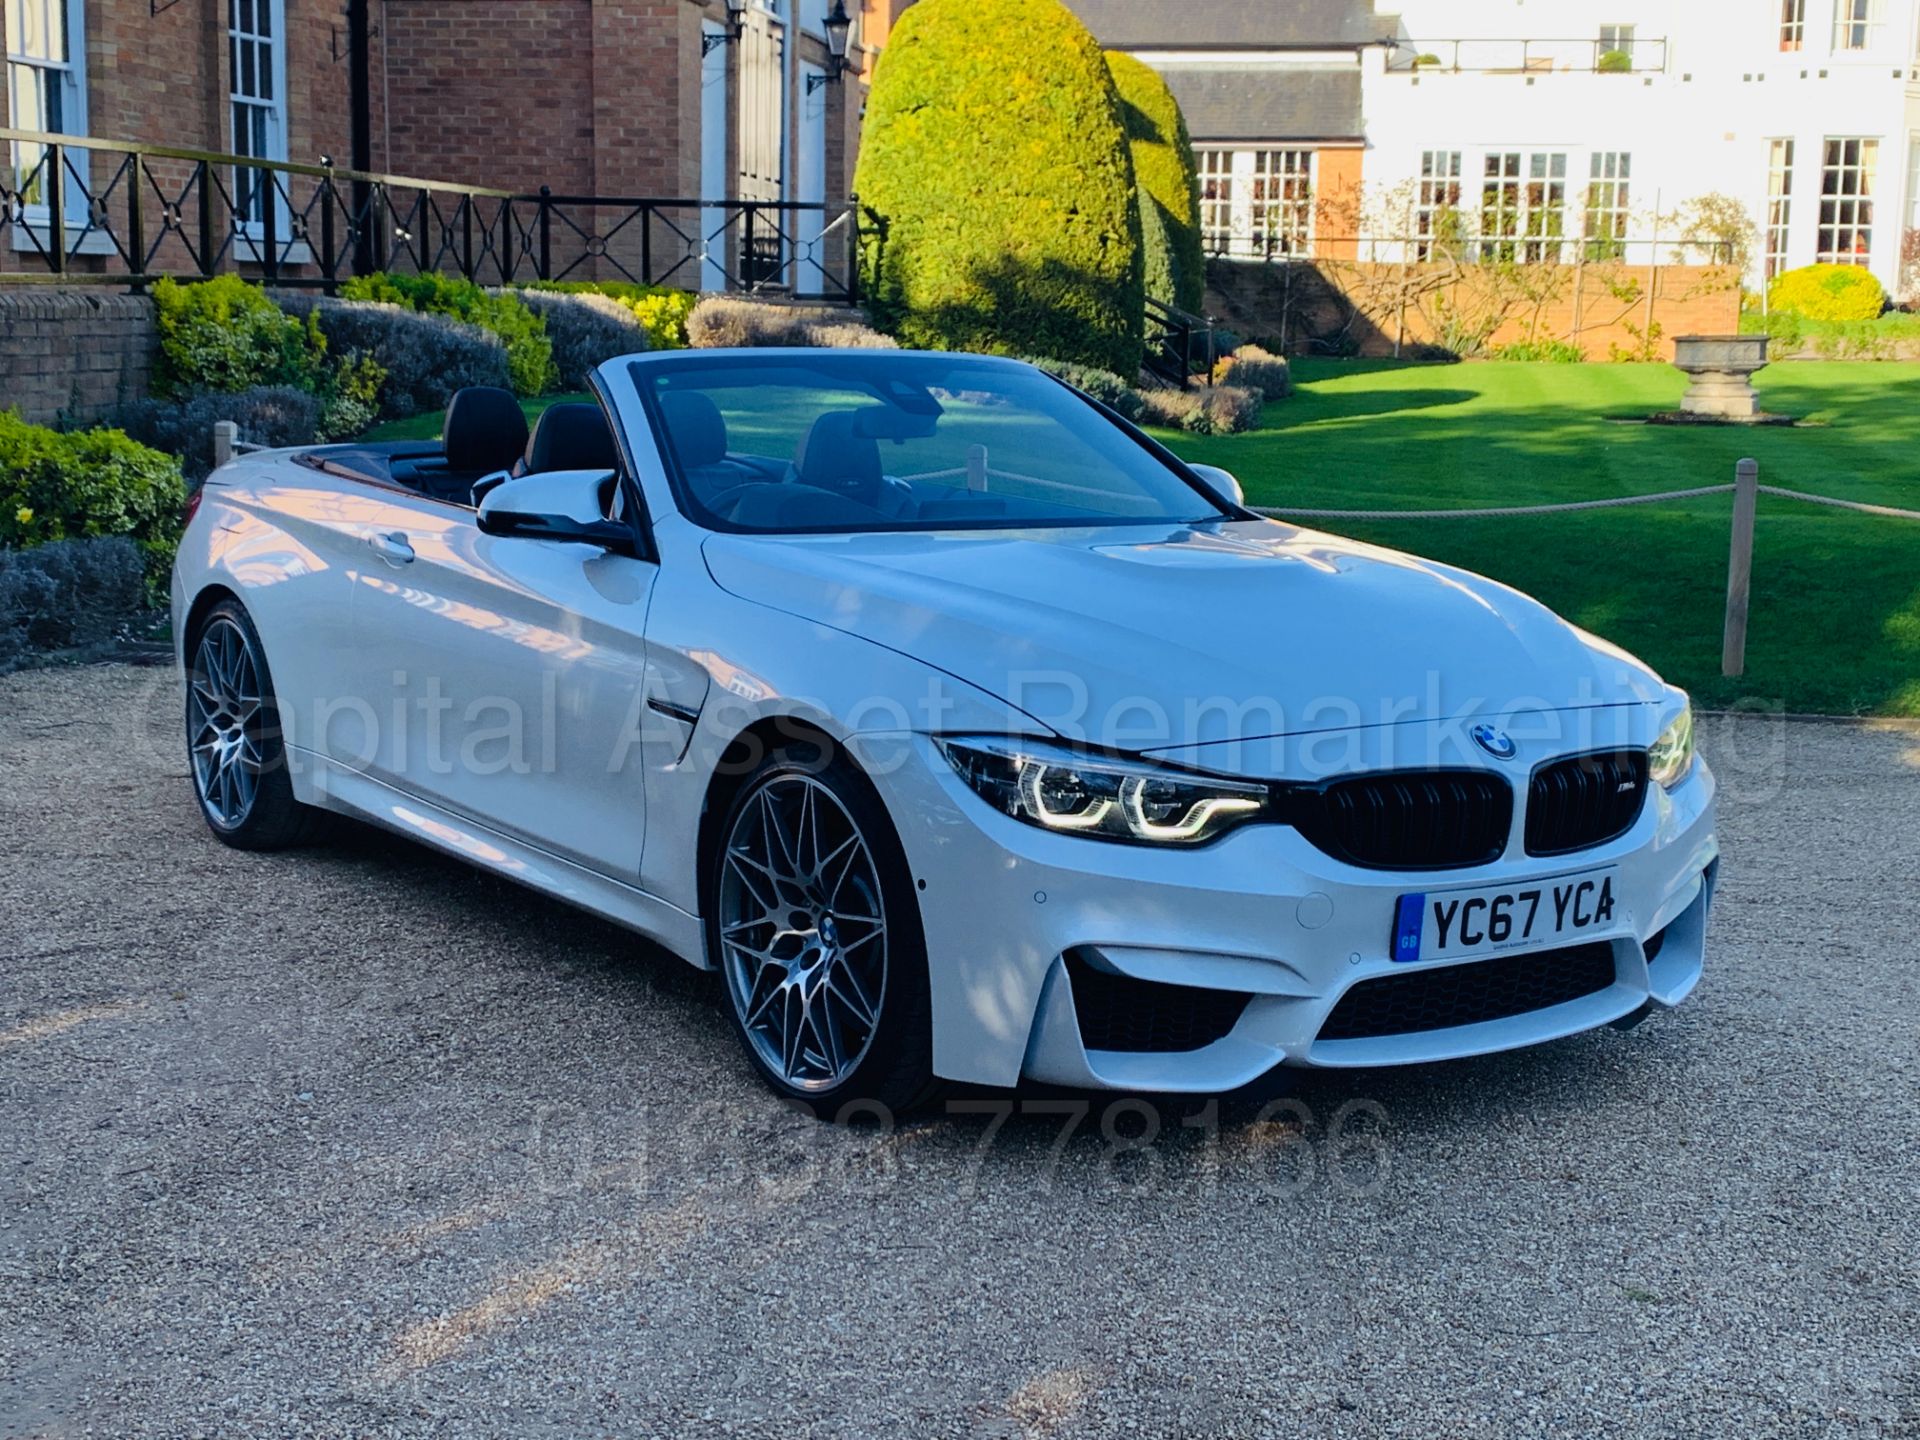 ON SALE BMW M4 CONVERTIBLE *COMPETITION PACKAGE* (2018 MODEL) '431 BHP - M DCT AUTO' WOW!!!!! - Image 21 of 89